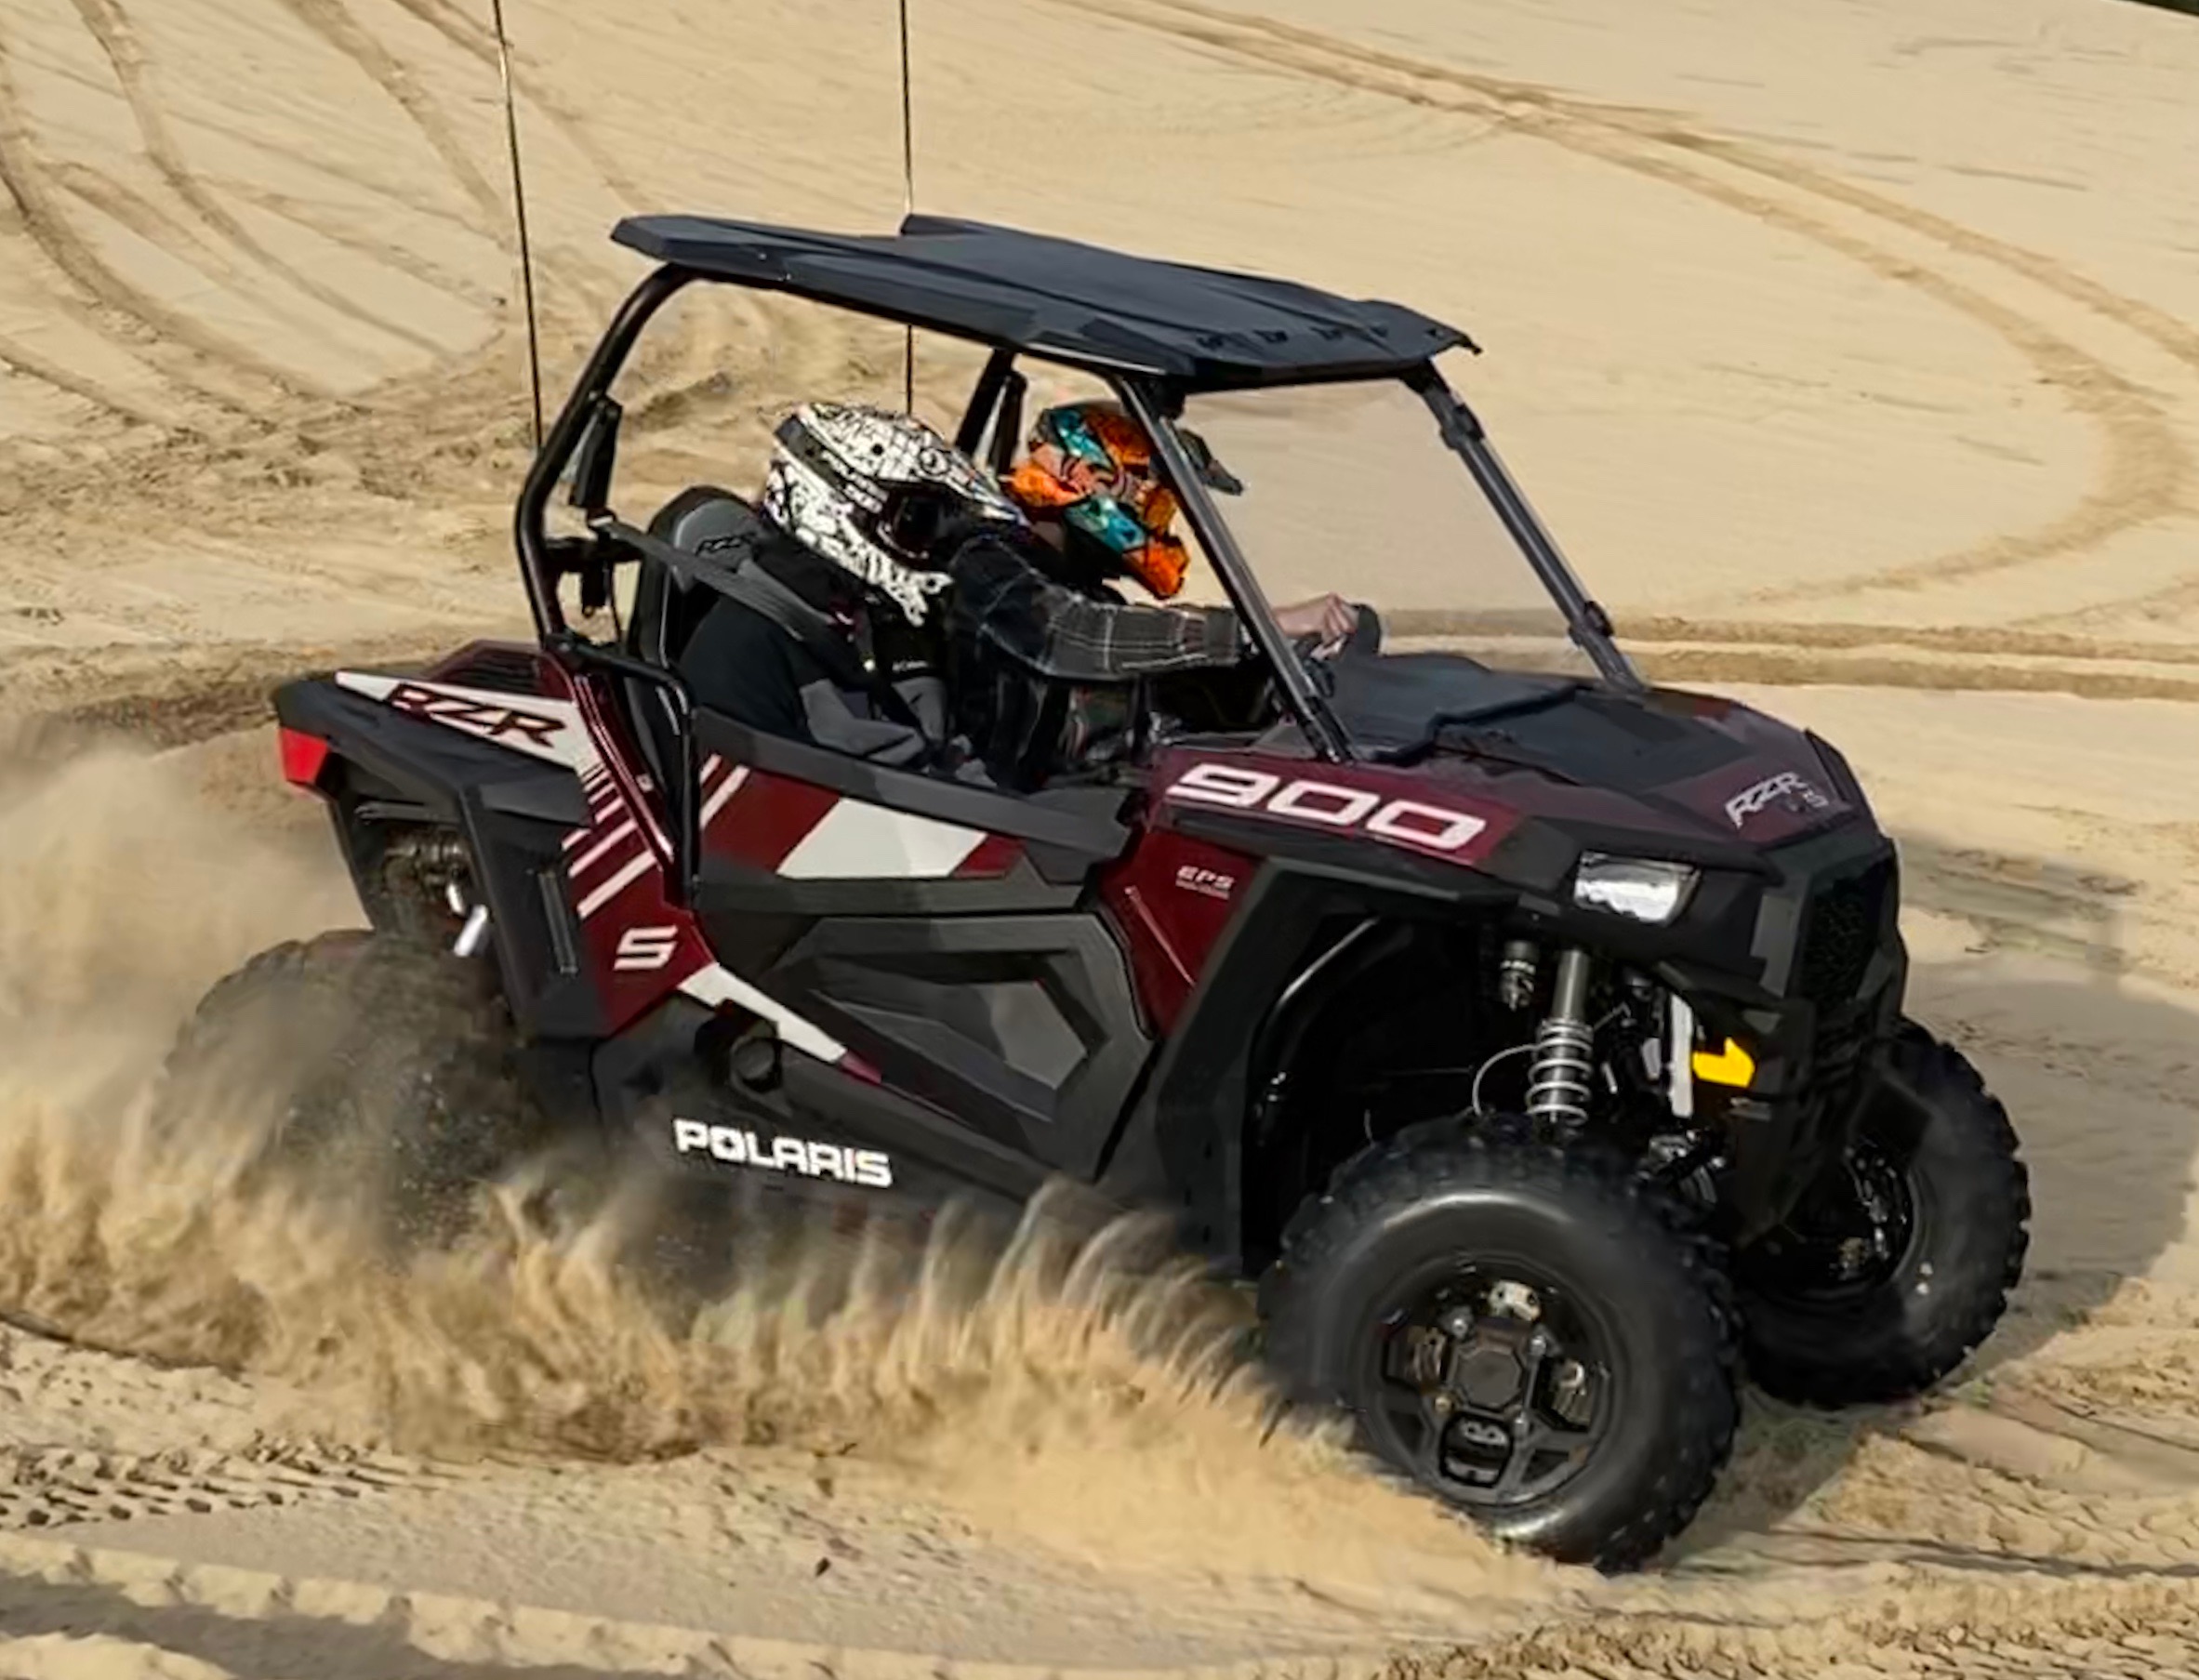 spinreel dune buggy and atv rentals and tours